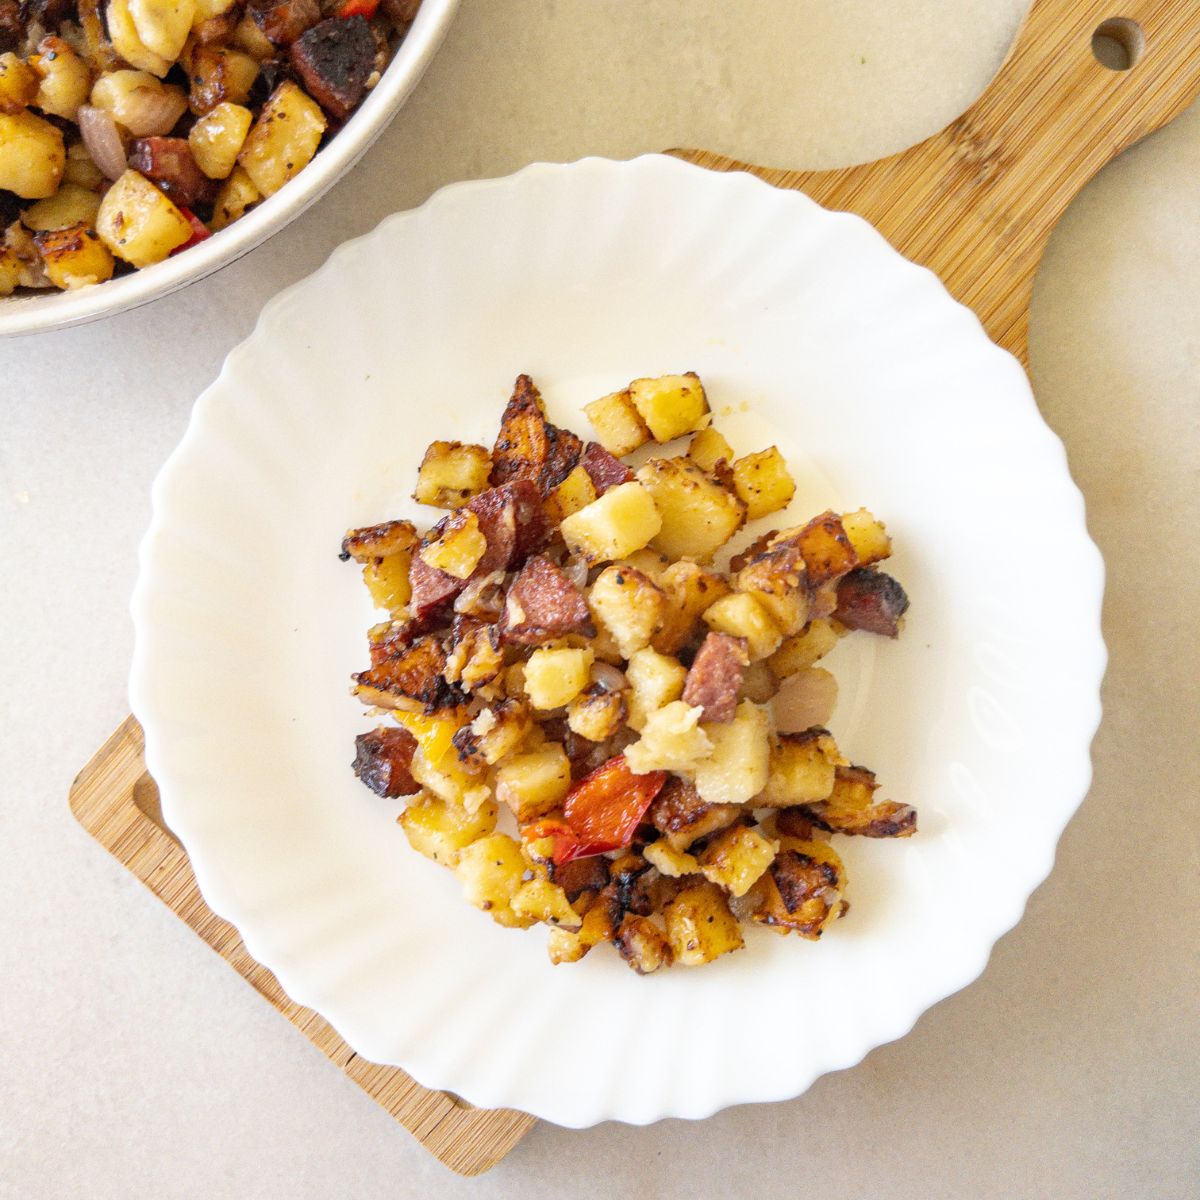 Skillet Fried Potatoes with Smoked Sausage